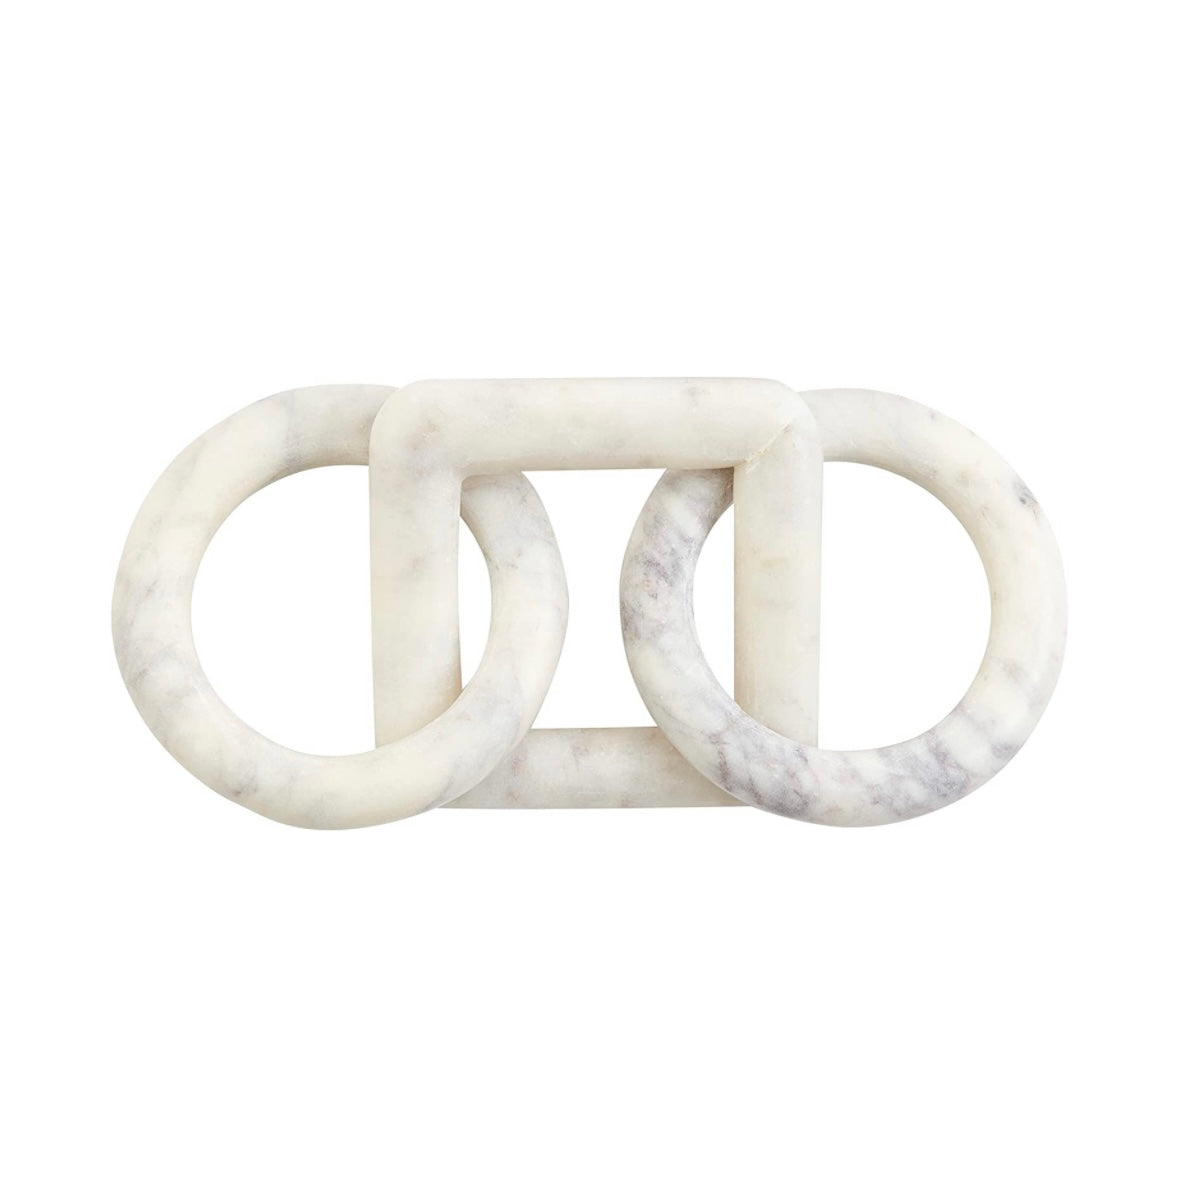 Marble Link Knot Decor